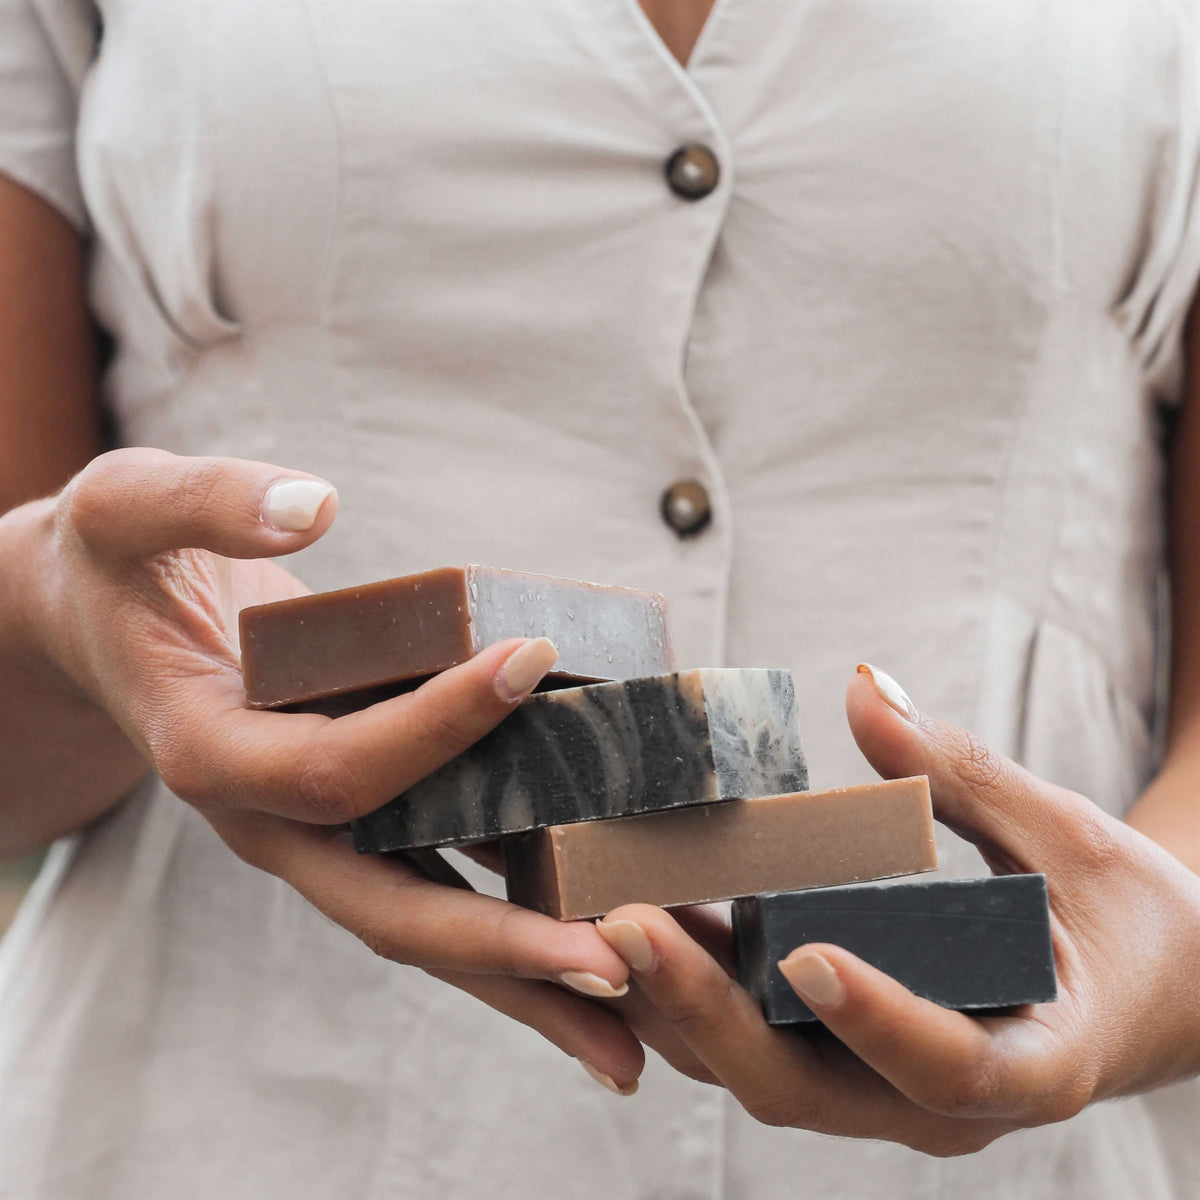 SOAP BAR | Charcoal &amp; Pine - Bam&amp;Boo - Eco-friendly, vegan, sustainable oral and personal care